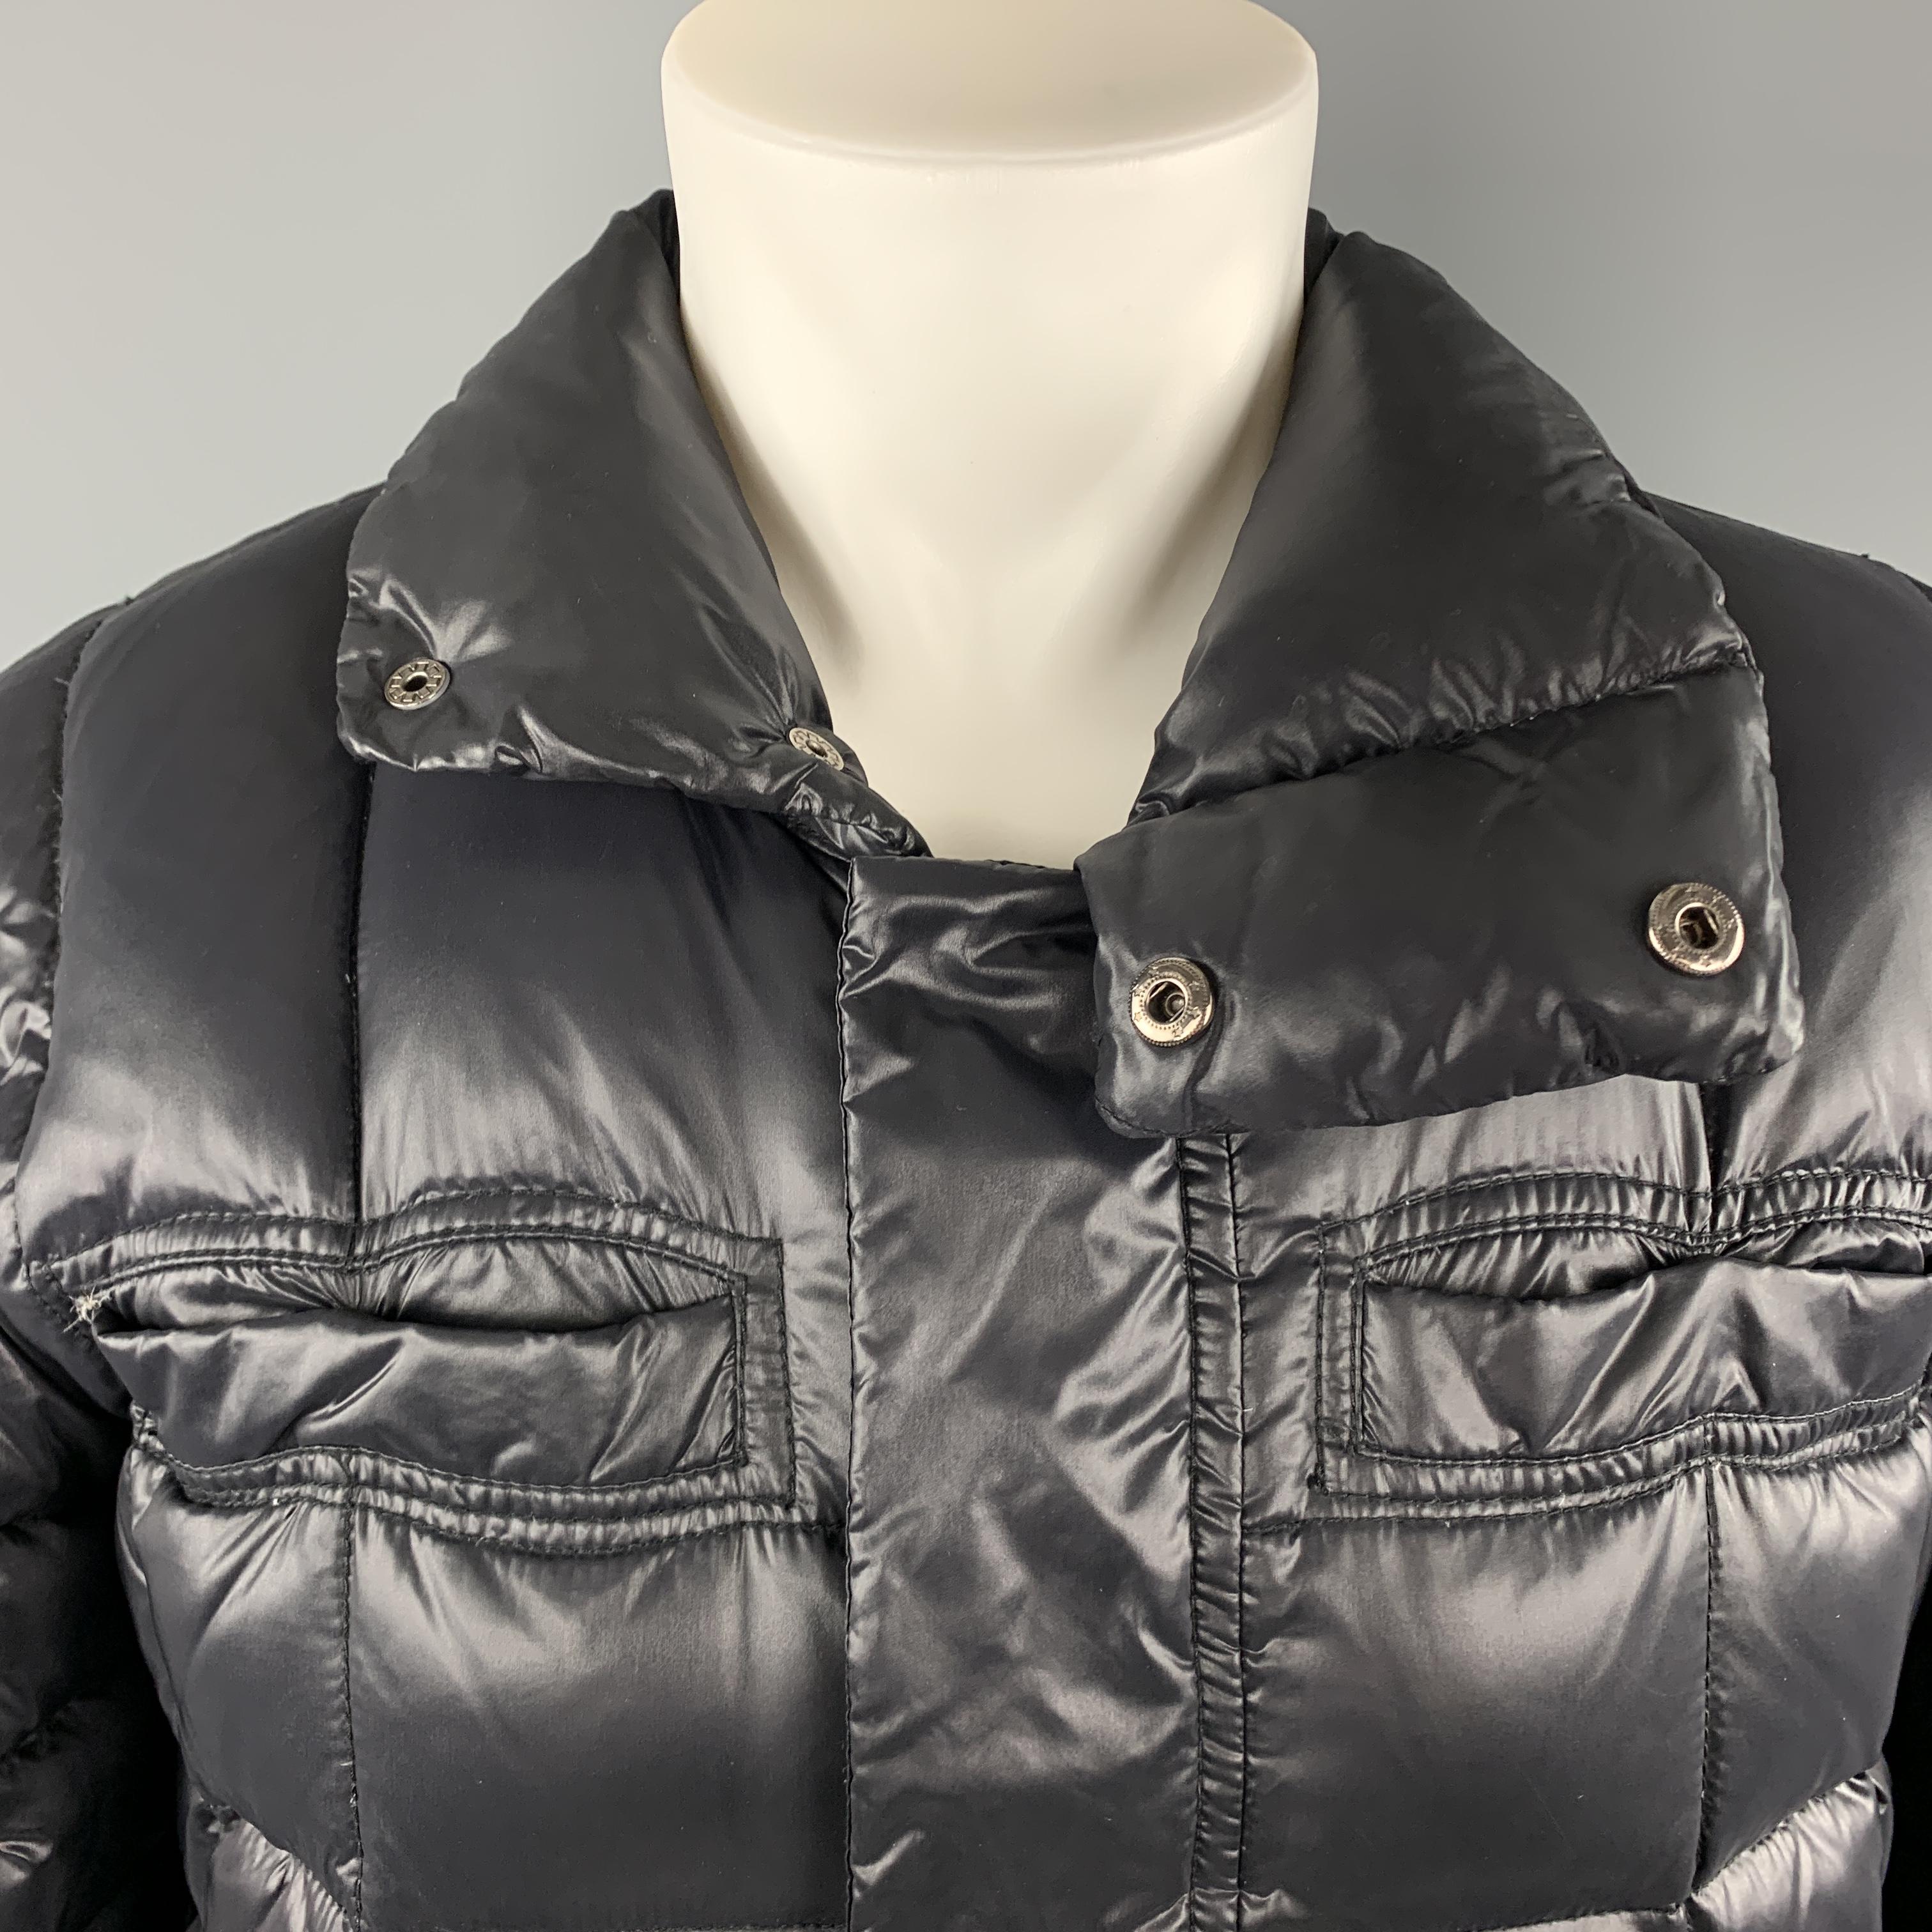 JUST CAVALLI puffer jacket comes in quilted high shine padded fabric with a high collar, chest and snap pockets, and hidden placket zip front. 

Excellent Pre-Owned Condition.
Marked: IT 48

Measurements:

Shoulder: 17 in.
Chest: 44 in.
Sleeve: 25